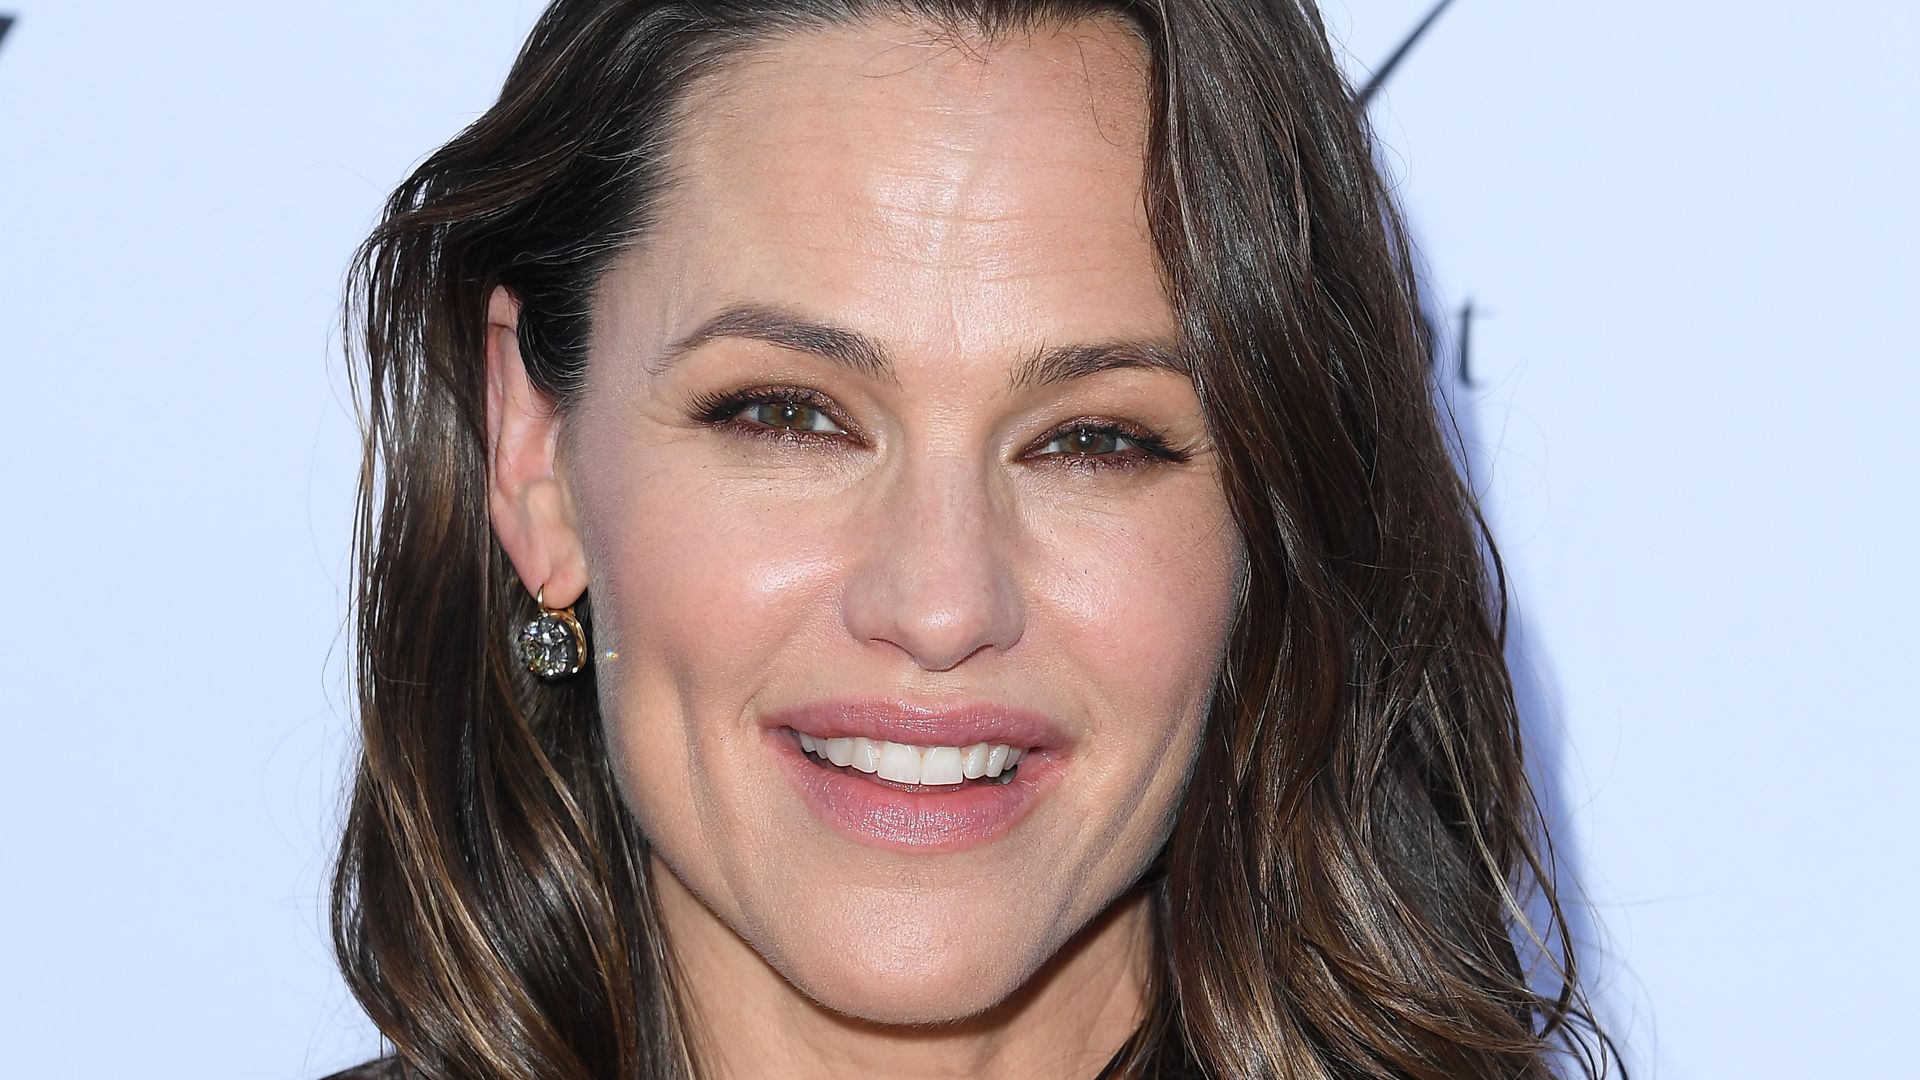 Jennifer Garner reveals she was 'born to breed' as she discusses baby number 4